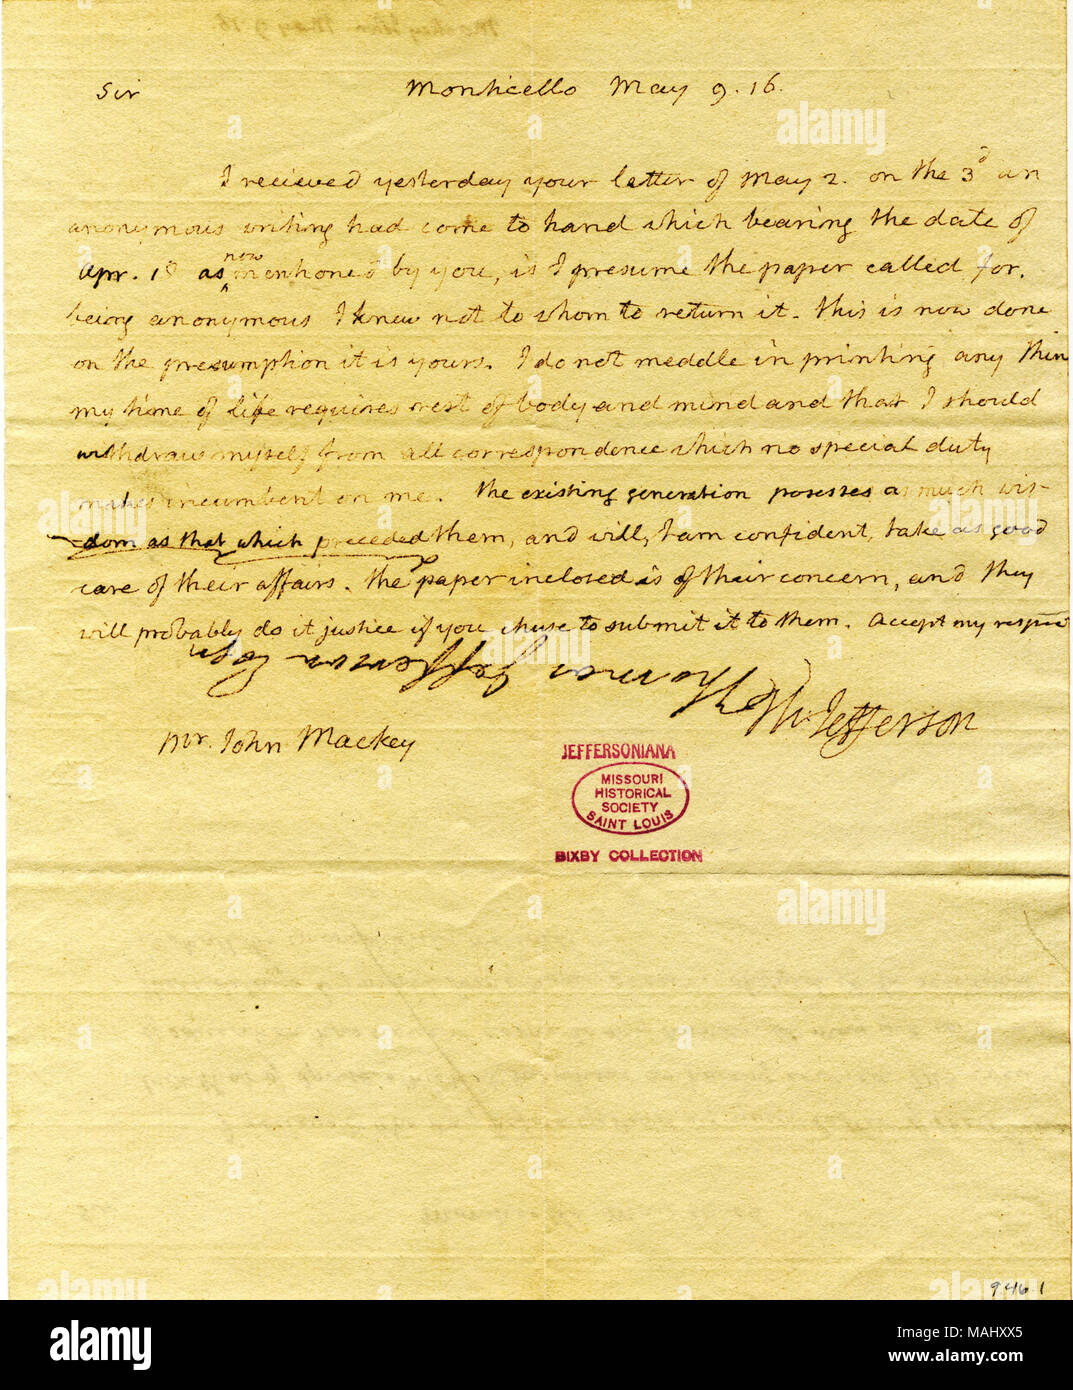 'I do not meddle in printing any thin[g] my time of life requires rest of body and mind and that I should withdraw myself from all correspondence which no special duty makes incumbent on me. The existing generation possesses as much wisdom as that which preceded them, and will, I am confident, take as good care of their affairs.' [This letter is written on the face of an old envelope but the back contains the draft of a letter dated 10 May 1816 that appears to be related to the same subject.] Title: Letter signed Thomas Jefferson, Monticello, to John Mackey, May 9, 1816  . 9 May 1816. Jefferso Stock Photo